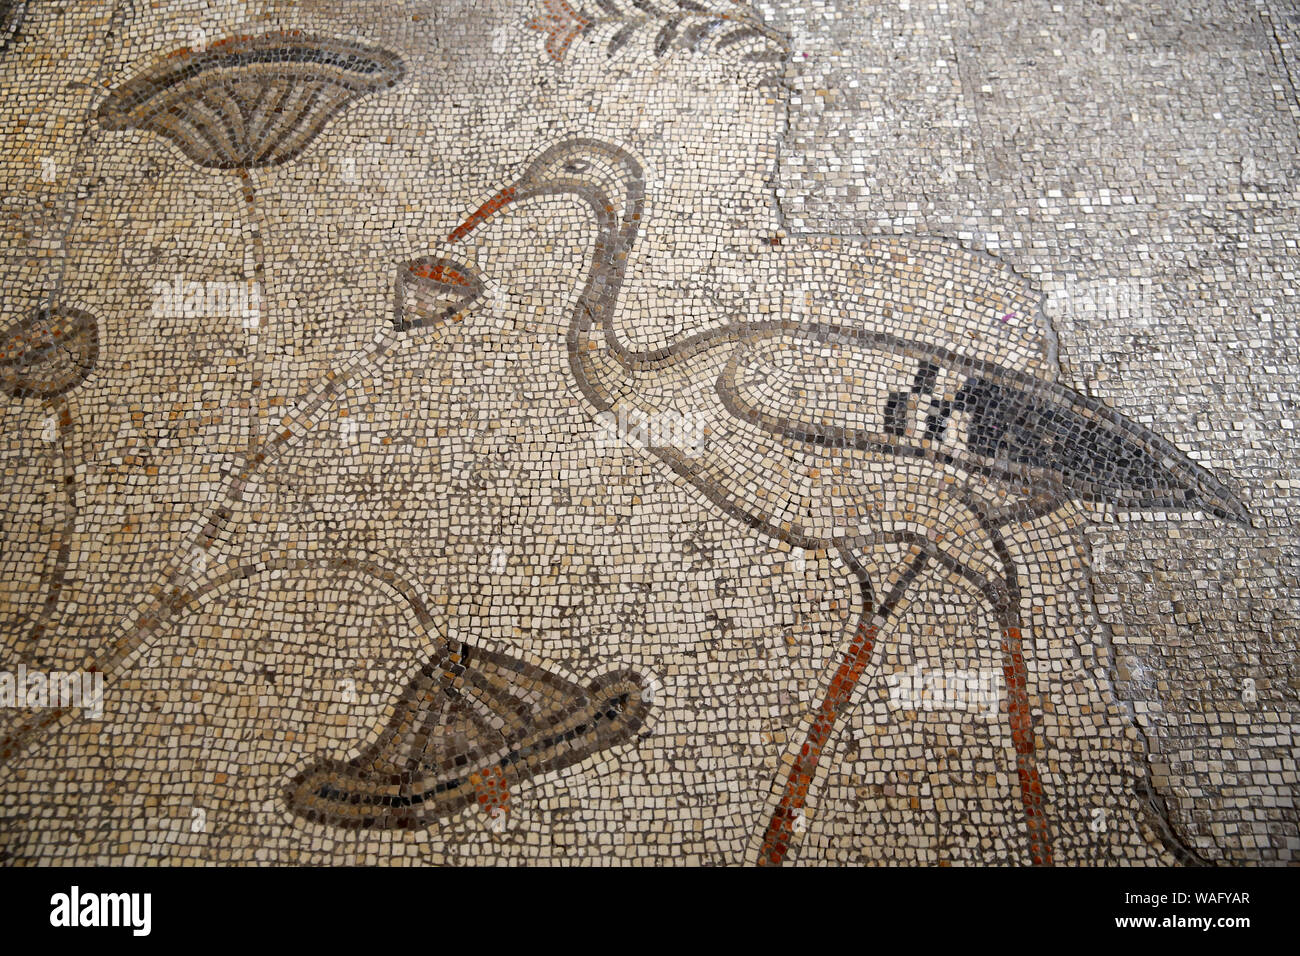 Crane nourishing a flower. Mosaic. Church of the Multiplication of Loaves and Fishes. Tabgha. Isräel. Stock Photo